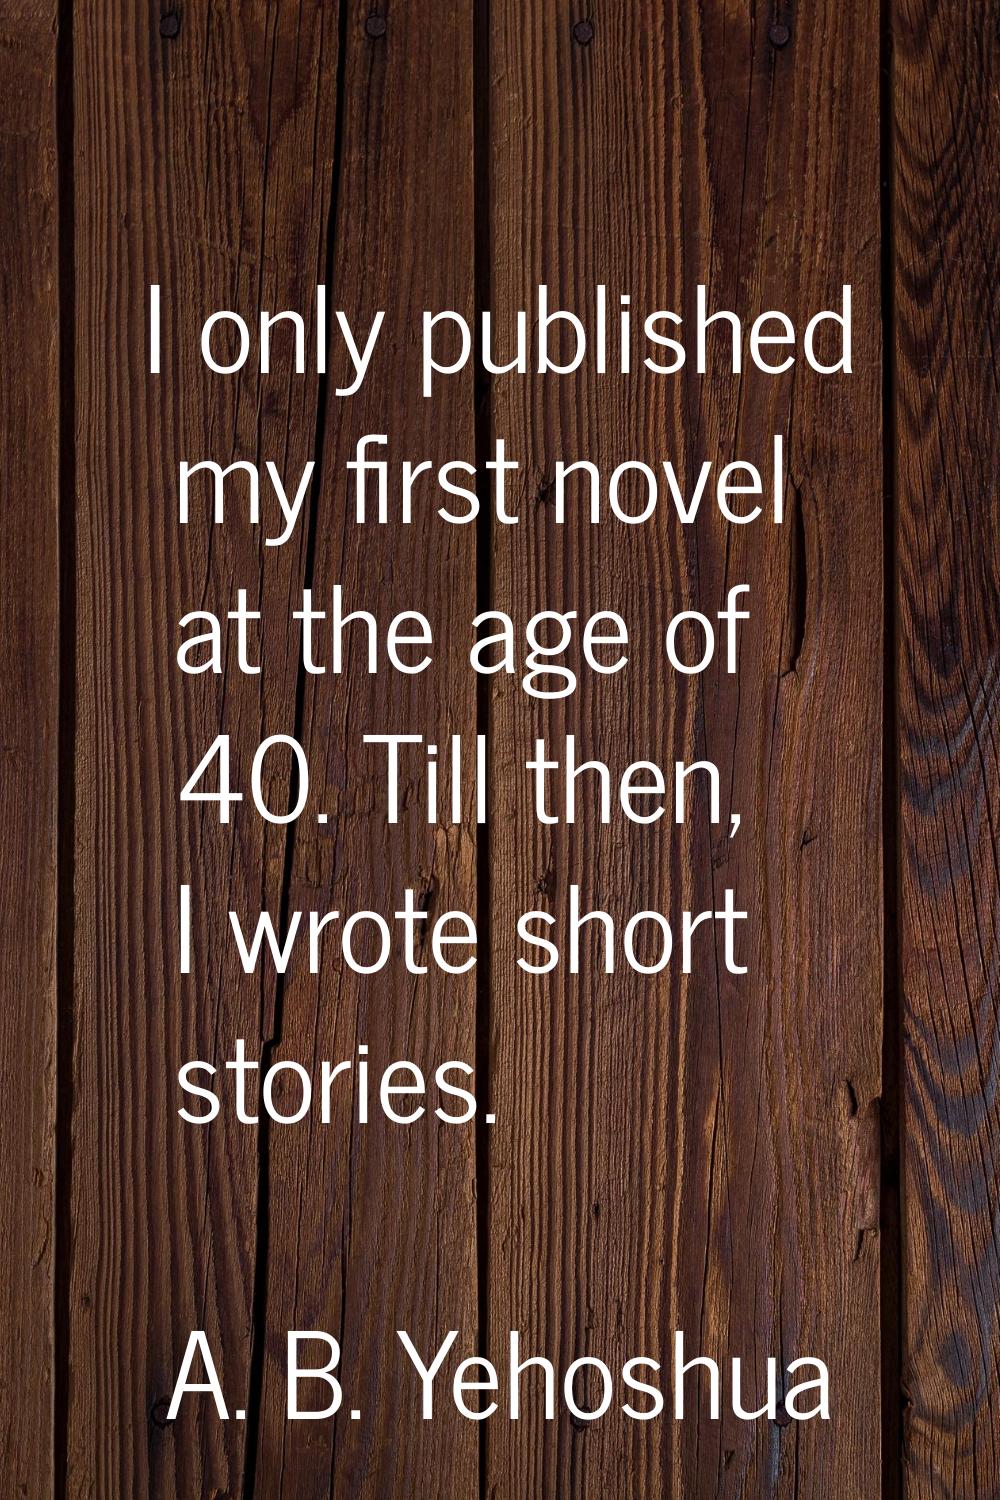 I only published my first novel at the age of 40. Till then, I wrote short stories.